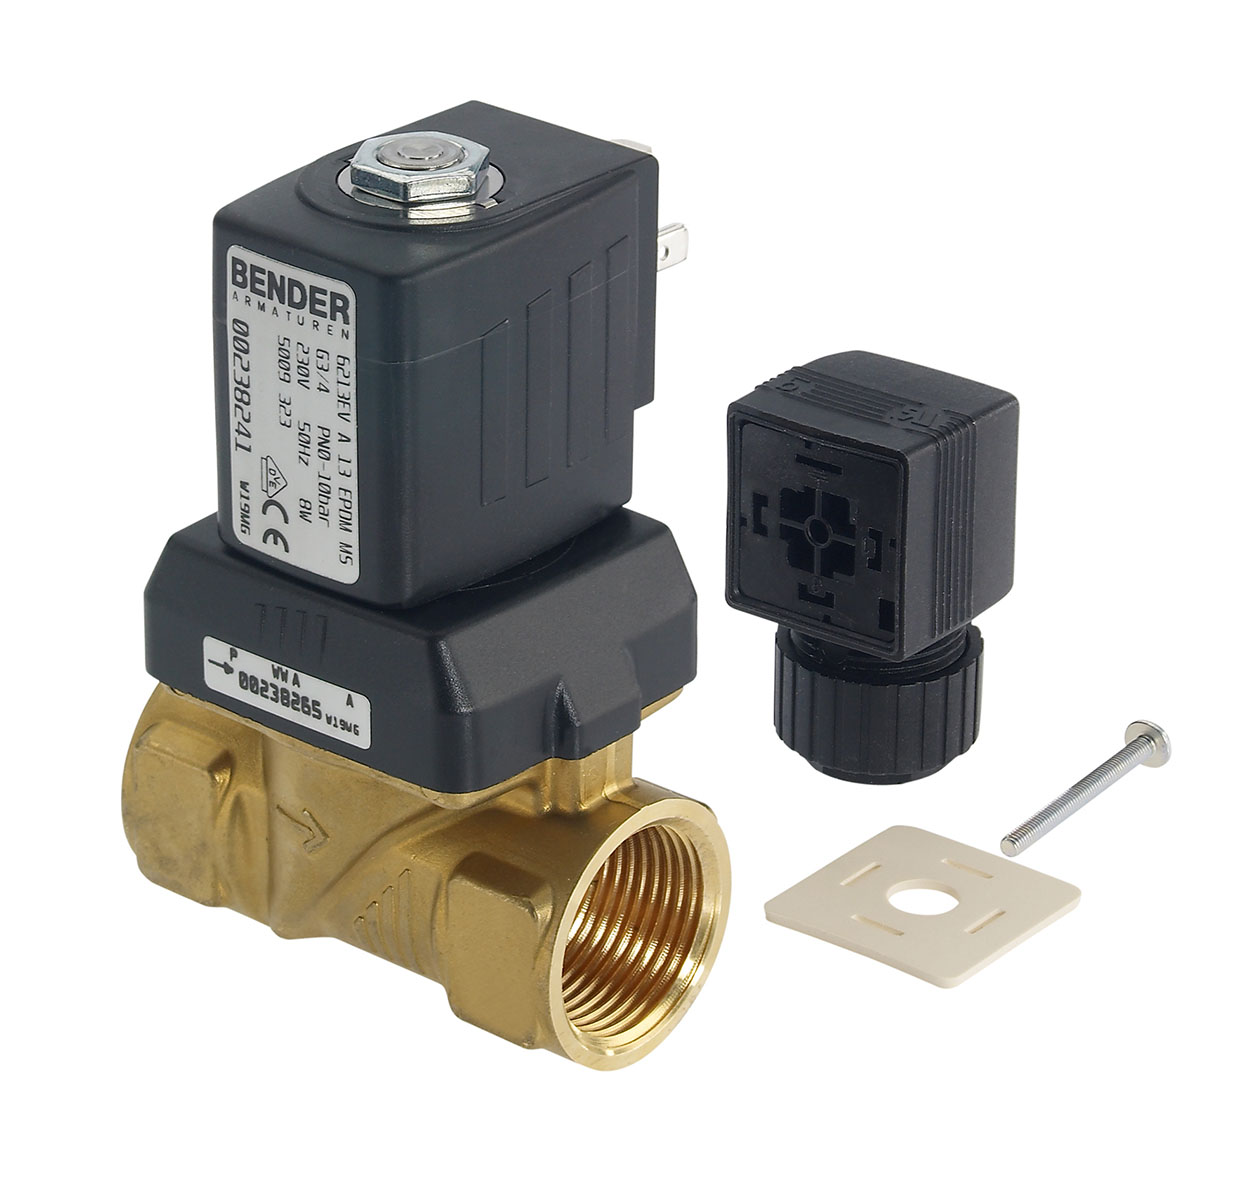 5009333 - 2/2 way solenoidvalve normally closed for fluids Type 1; female thread